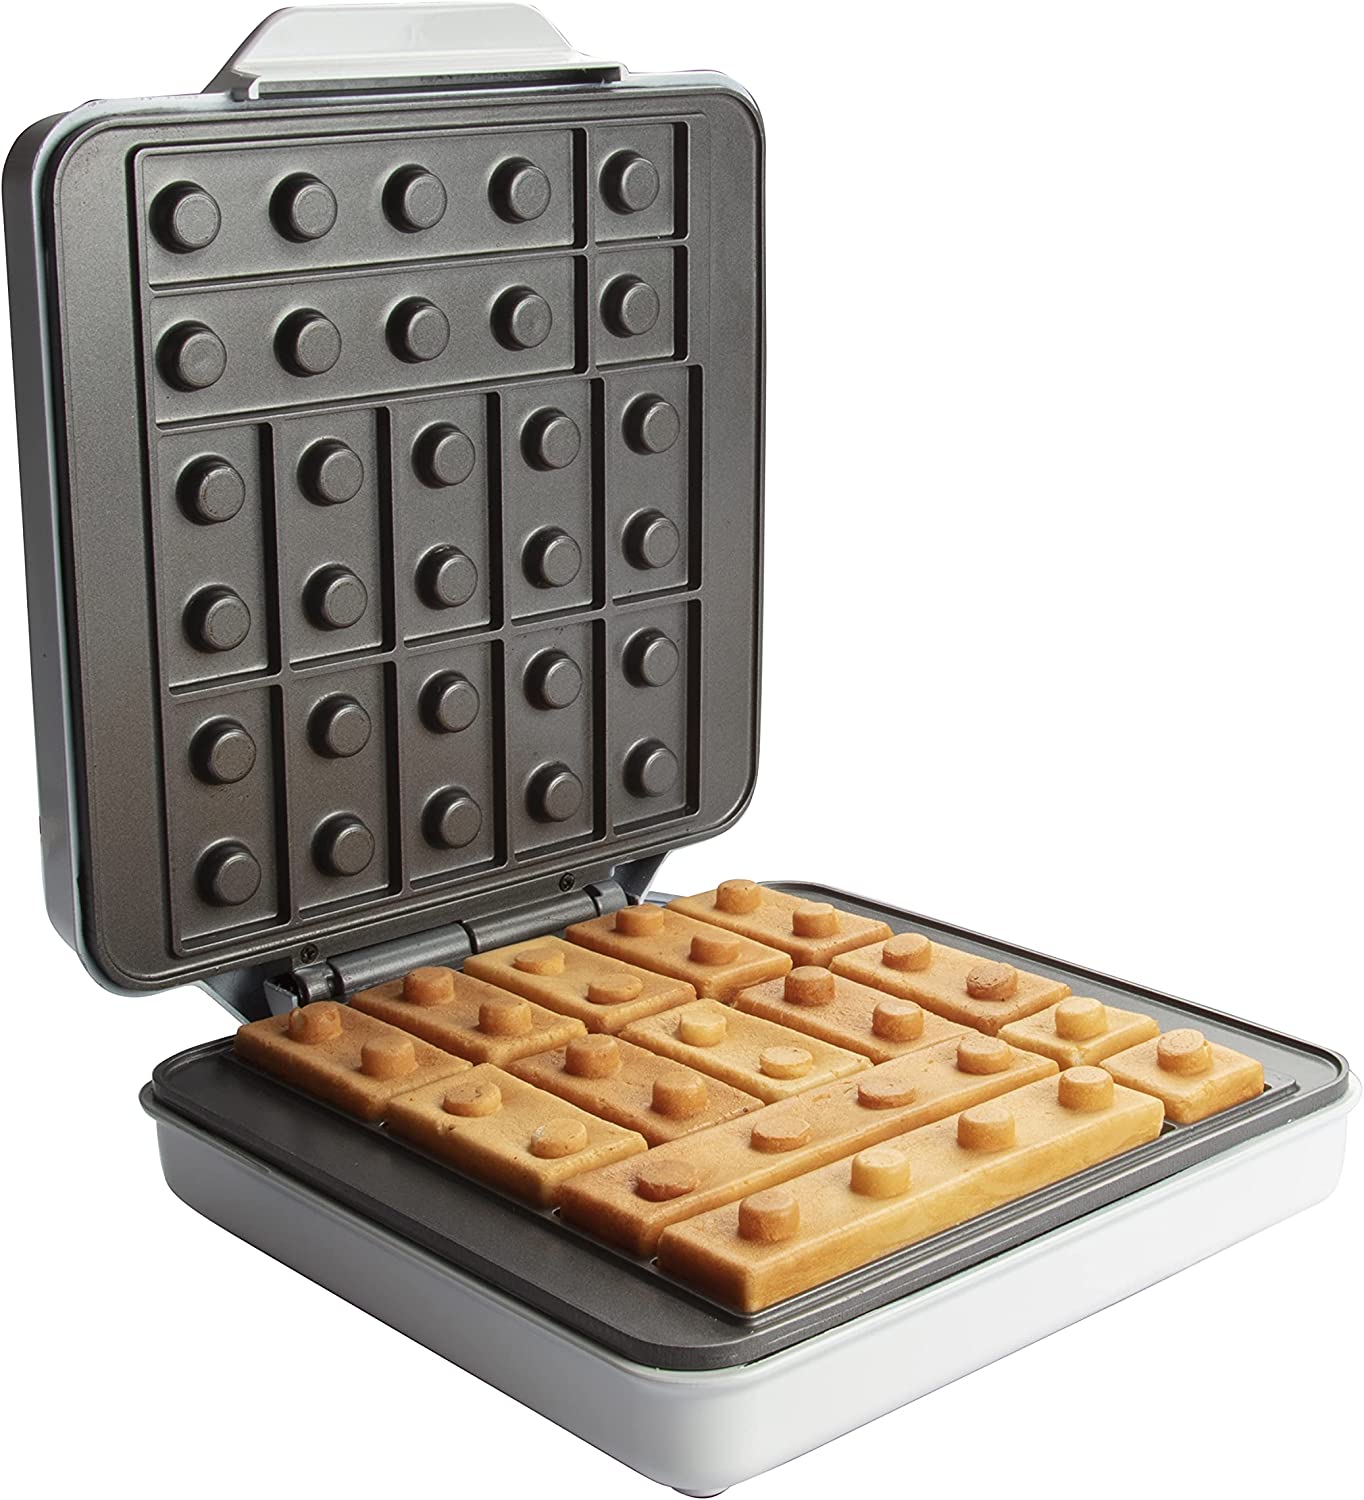 Building Brick Electric Waffle Maker with 2 Construction Eating Plates - Cook Fun Buildable Waffles in Minutes - Revolutionize Breakfast